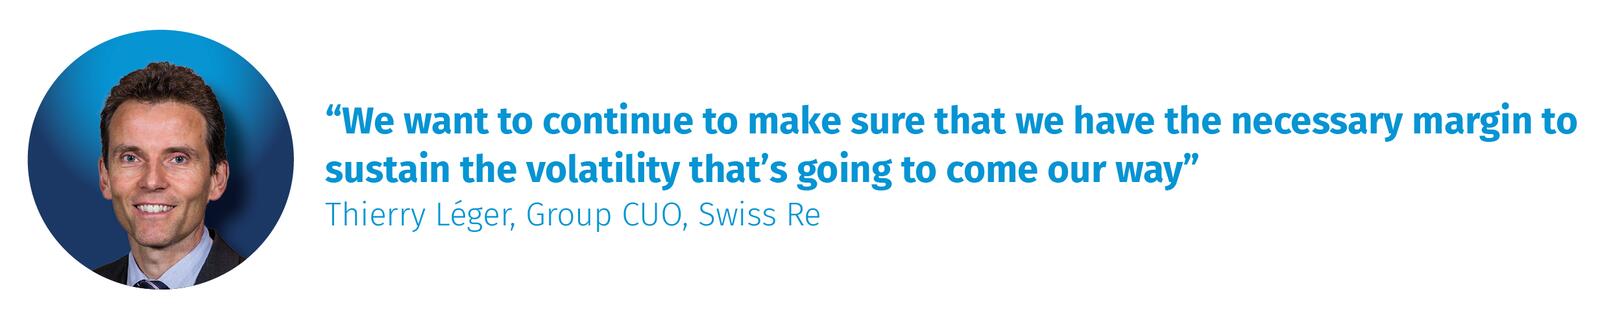 Thierry Léger, Group CUO, Swiss Re 2